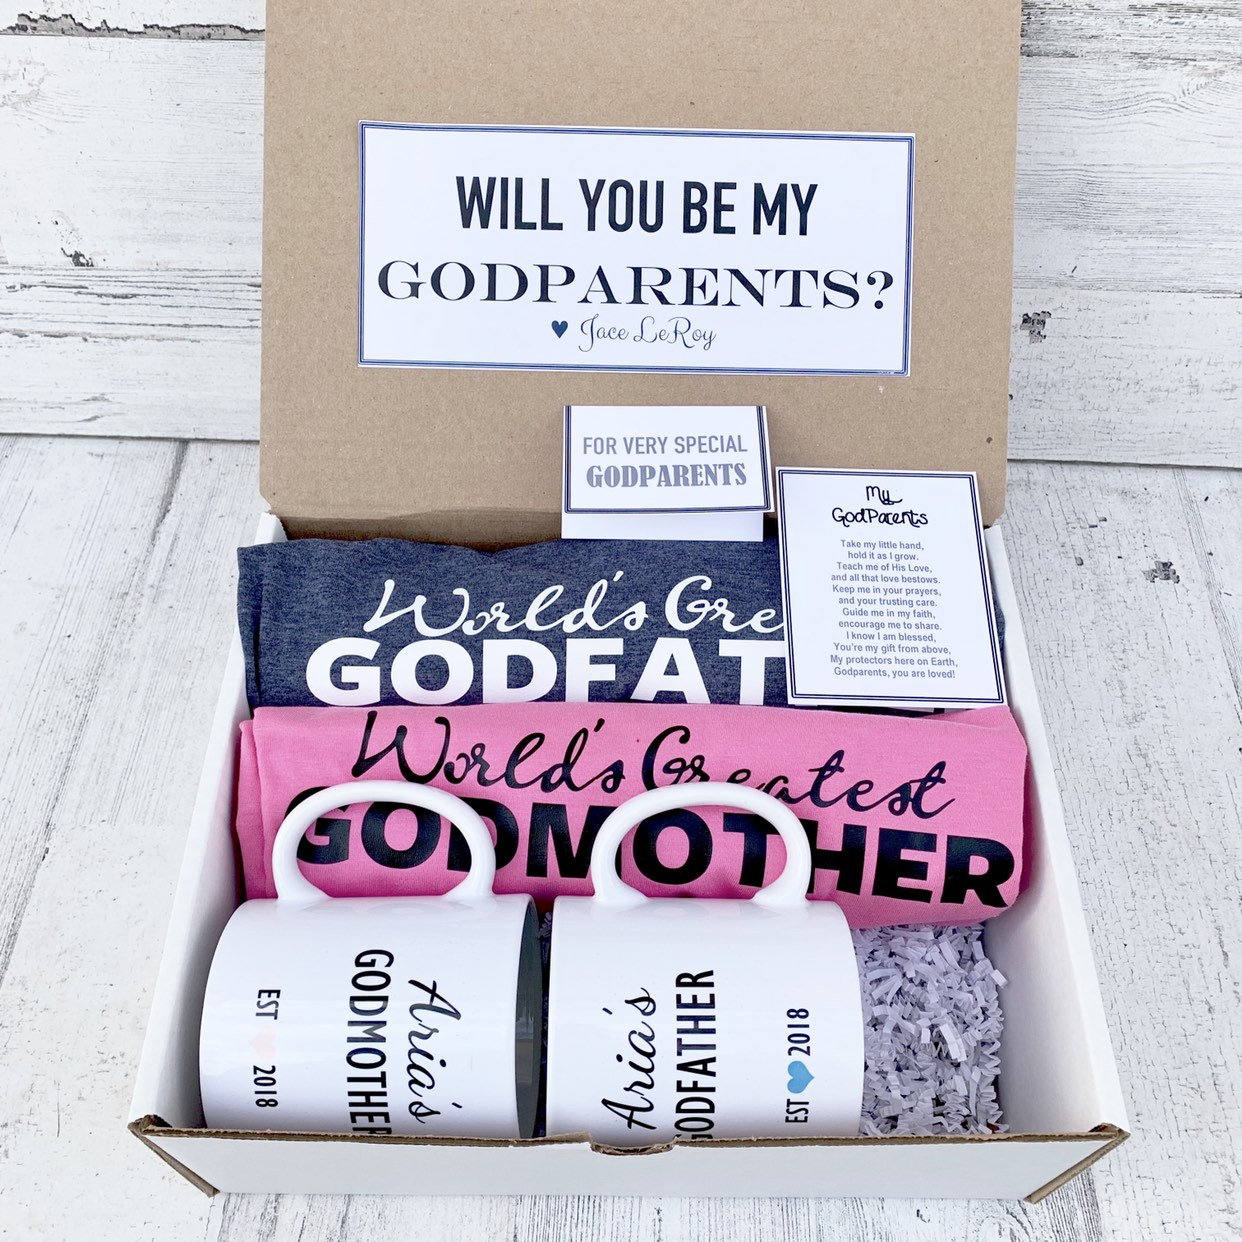 godparents-box-personalized-godparents-gift-will-you-be-my